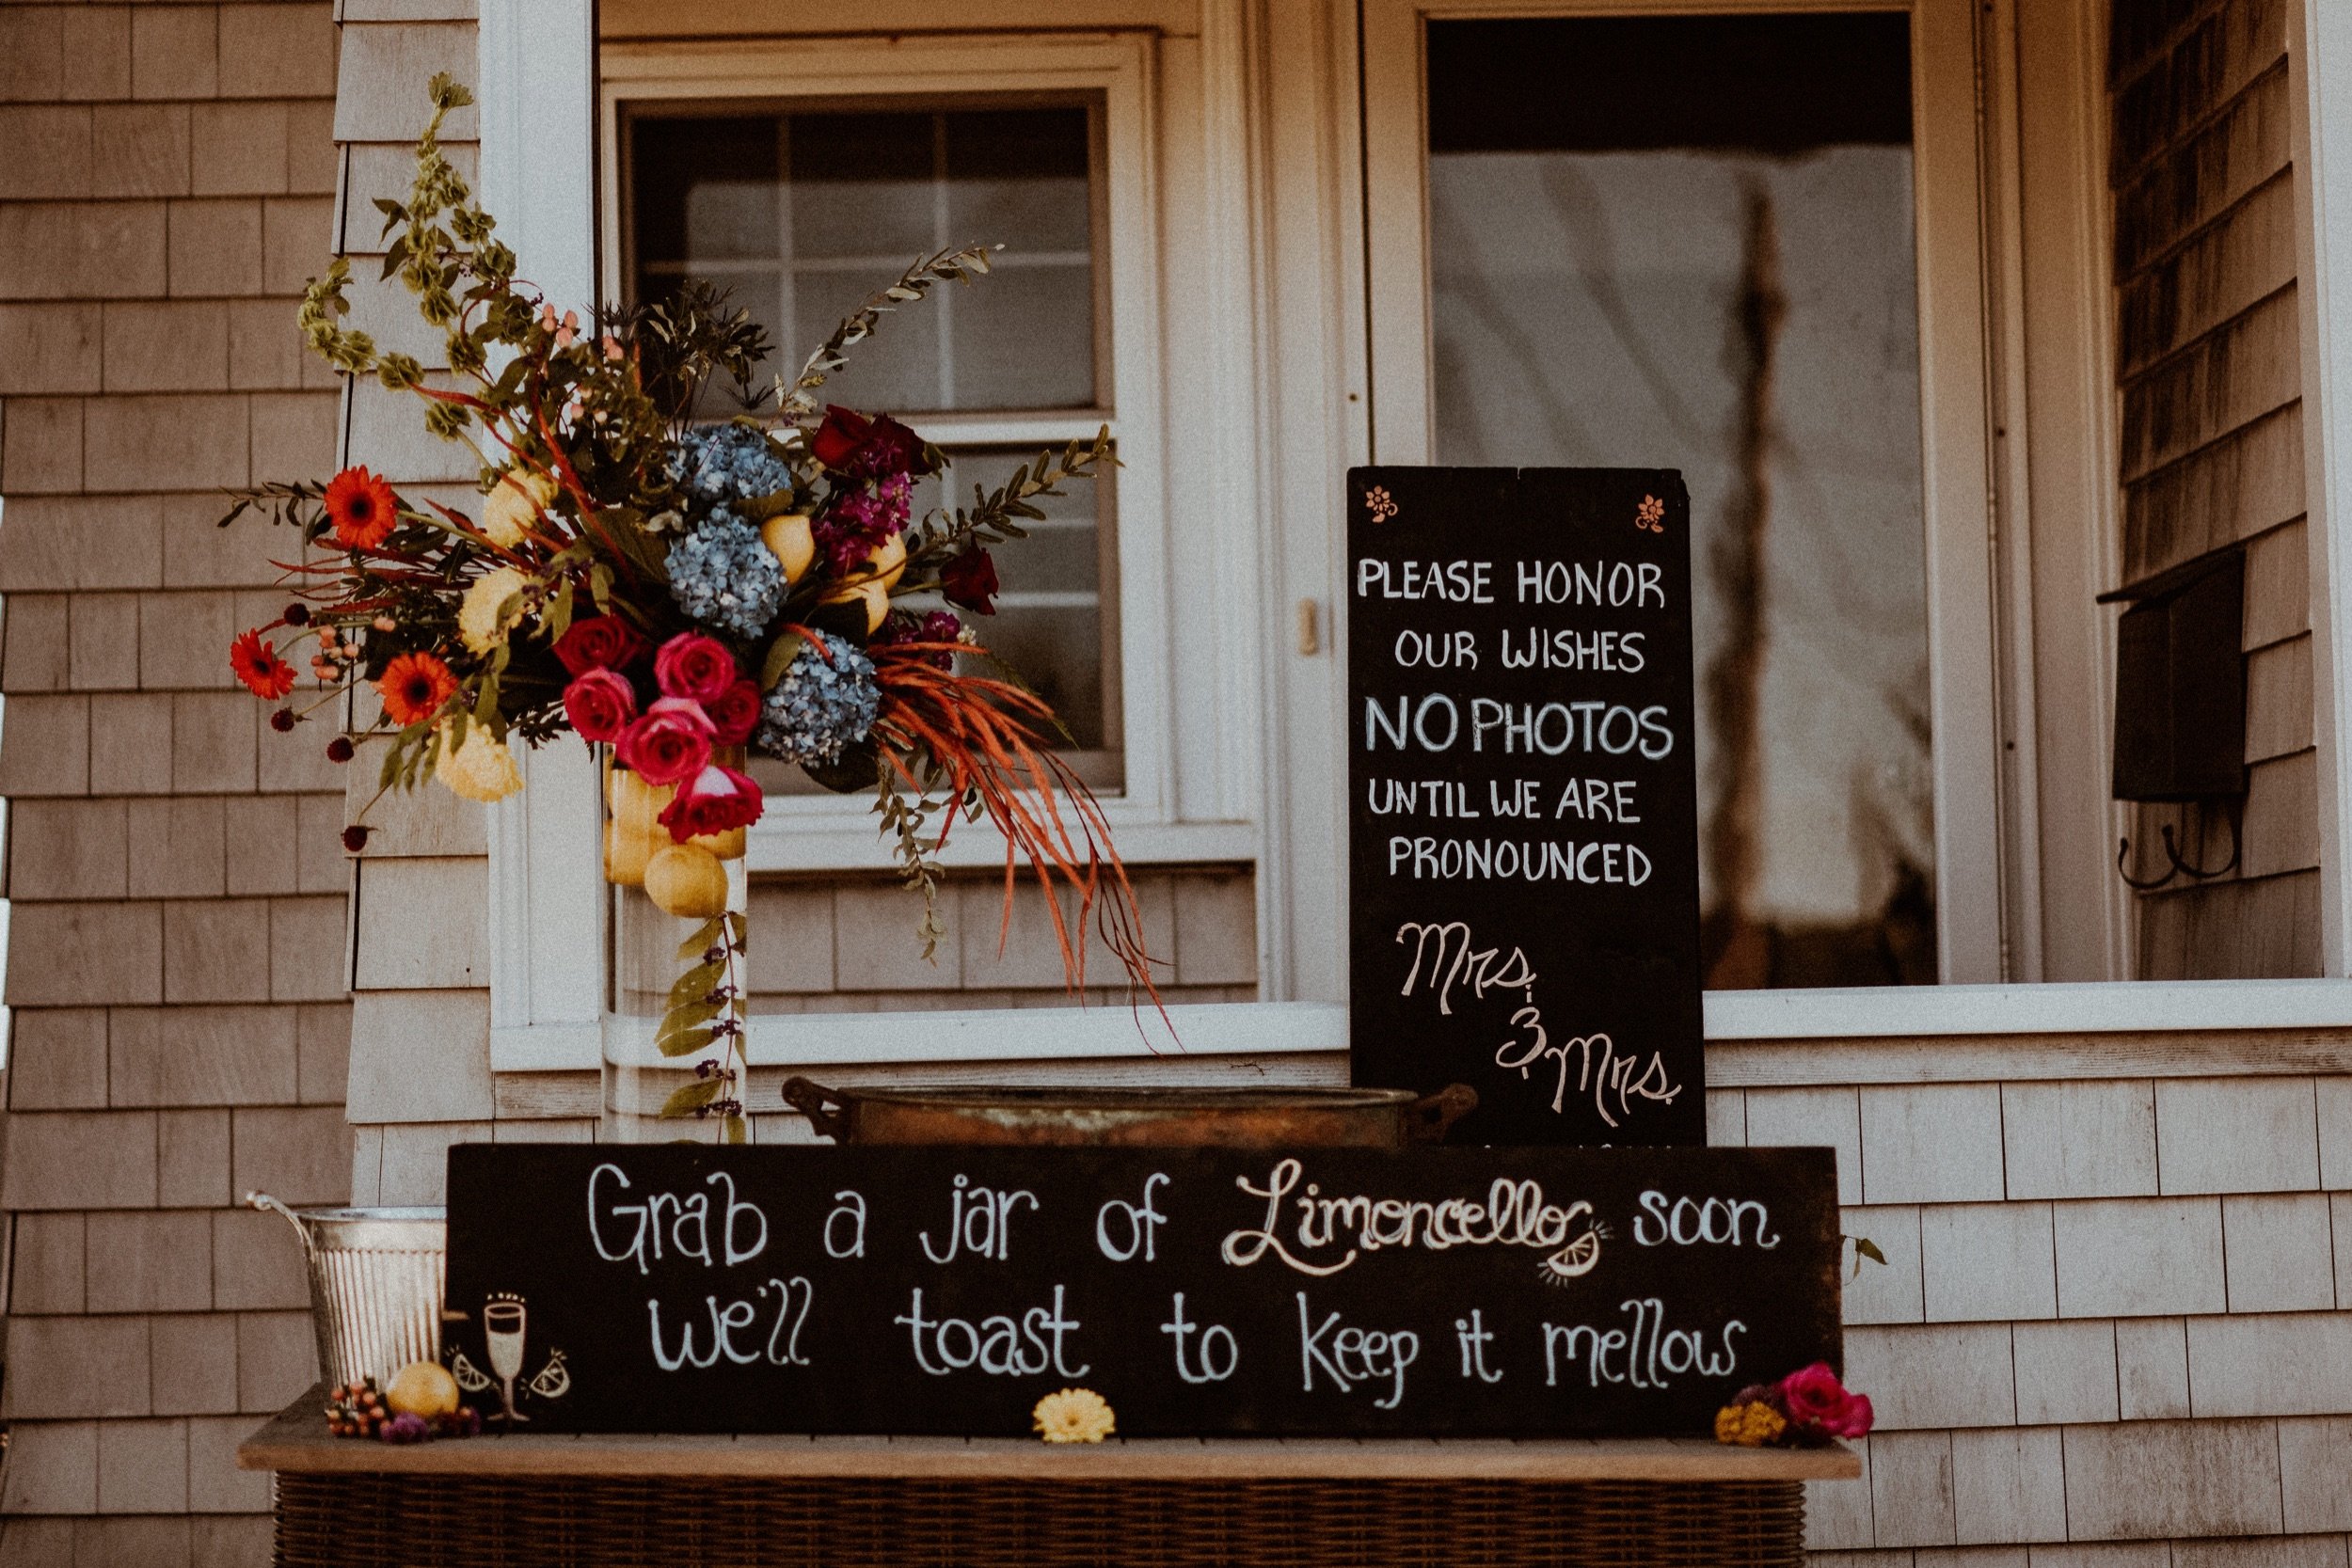 39_Colorful Intimate LGBTQ Wedding in Rockport MA - Vanessa Alves Photography.jpg